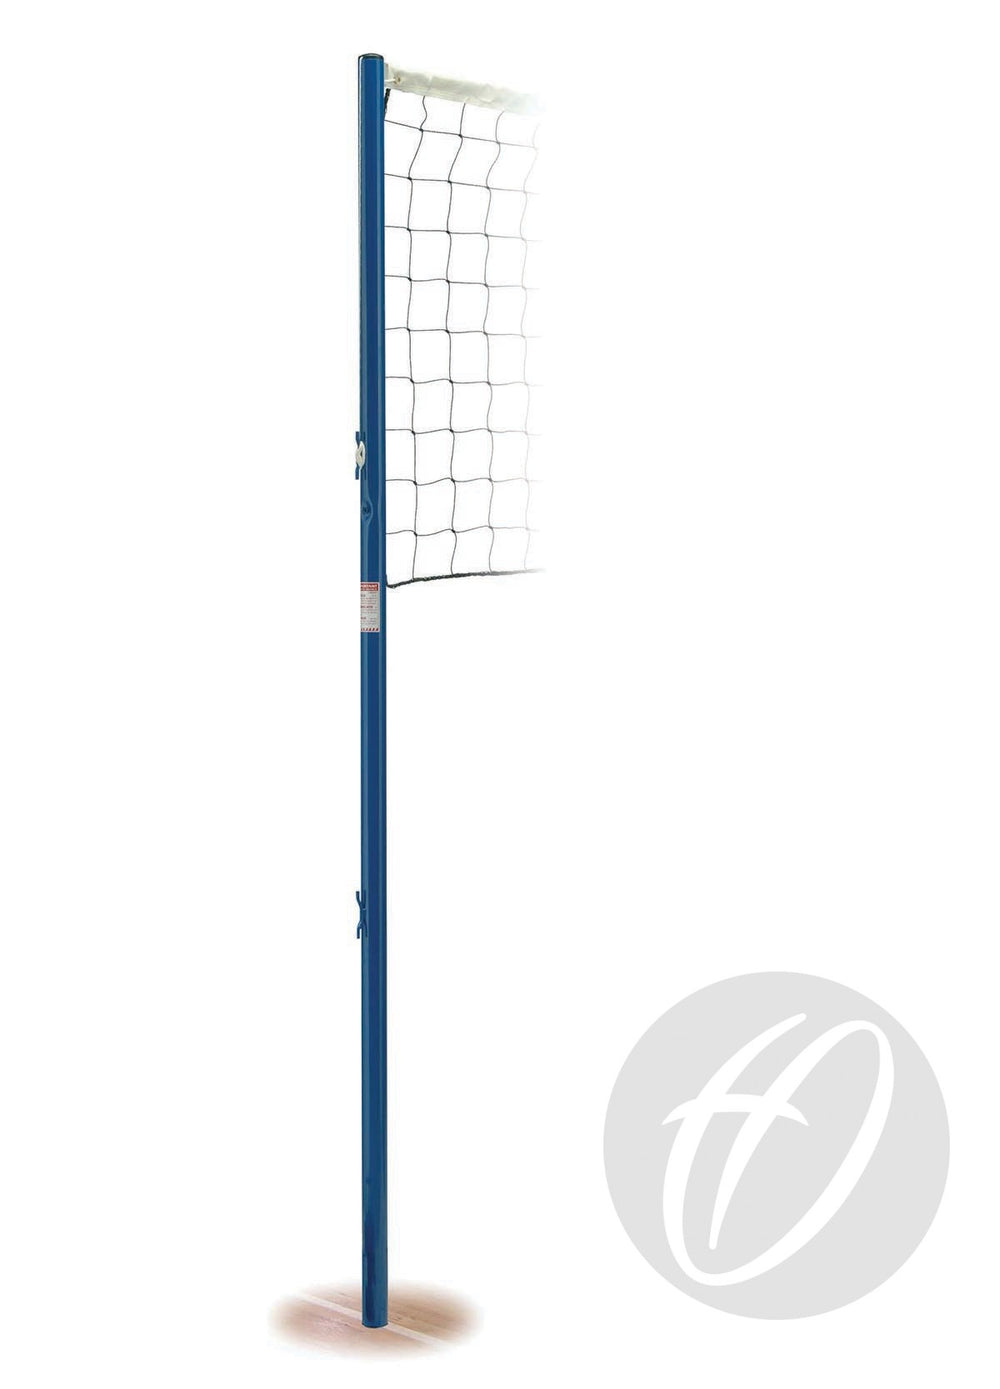 Vb5 Socketed Volleyball Posts